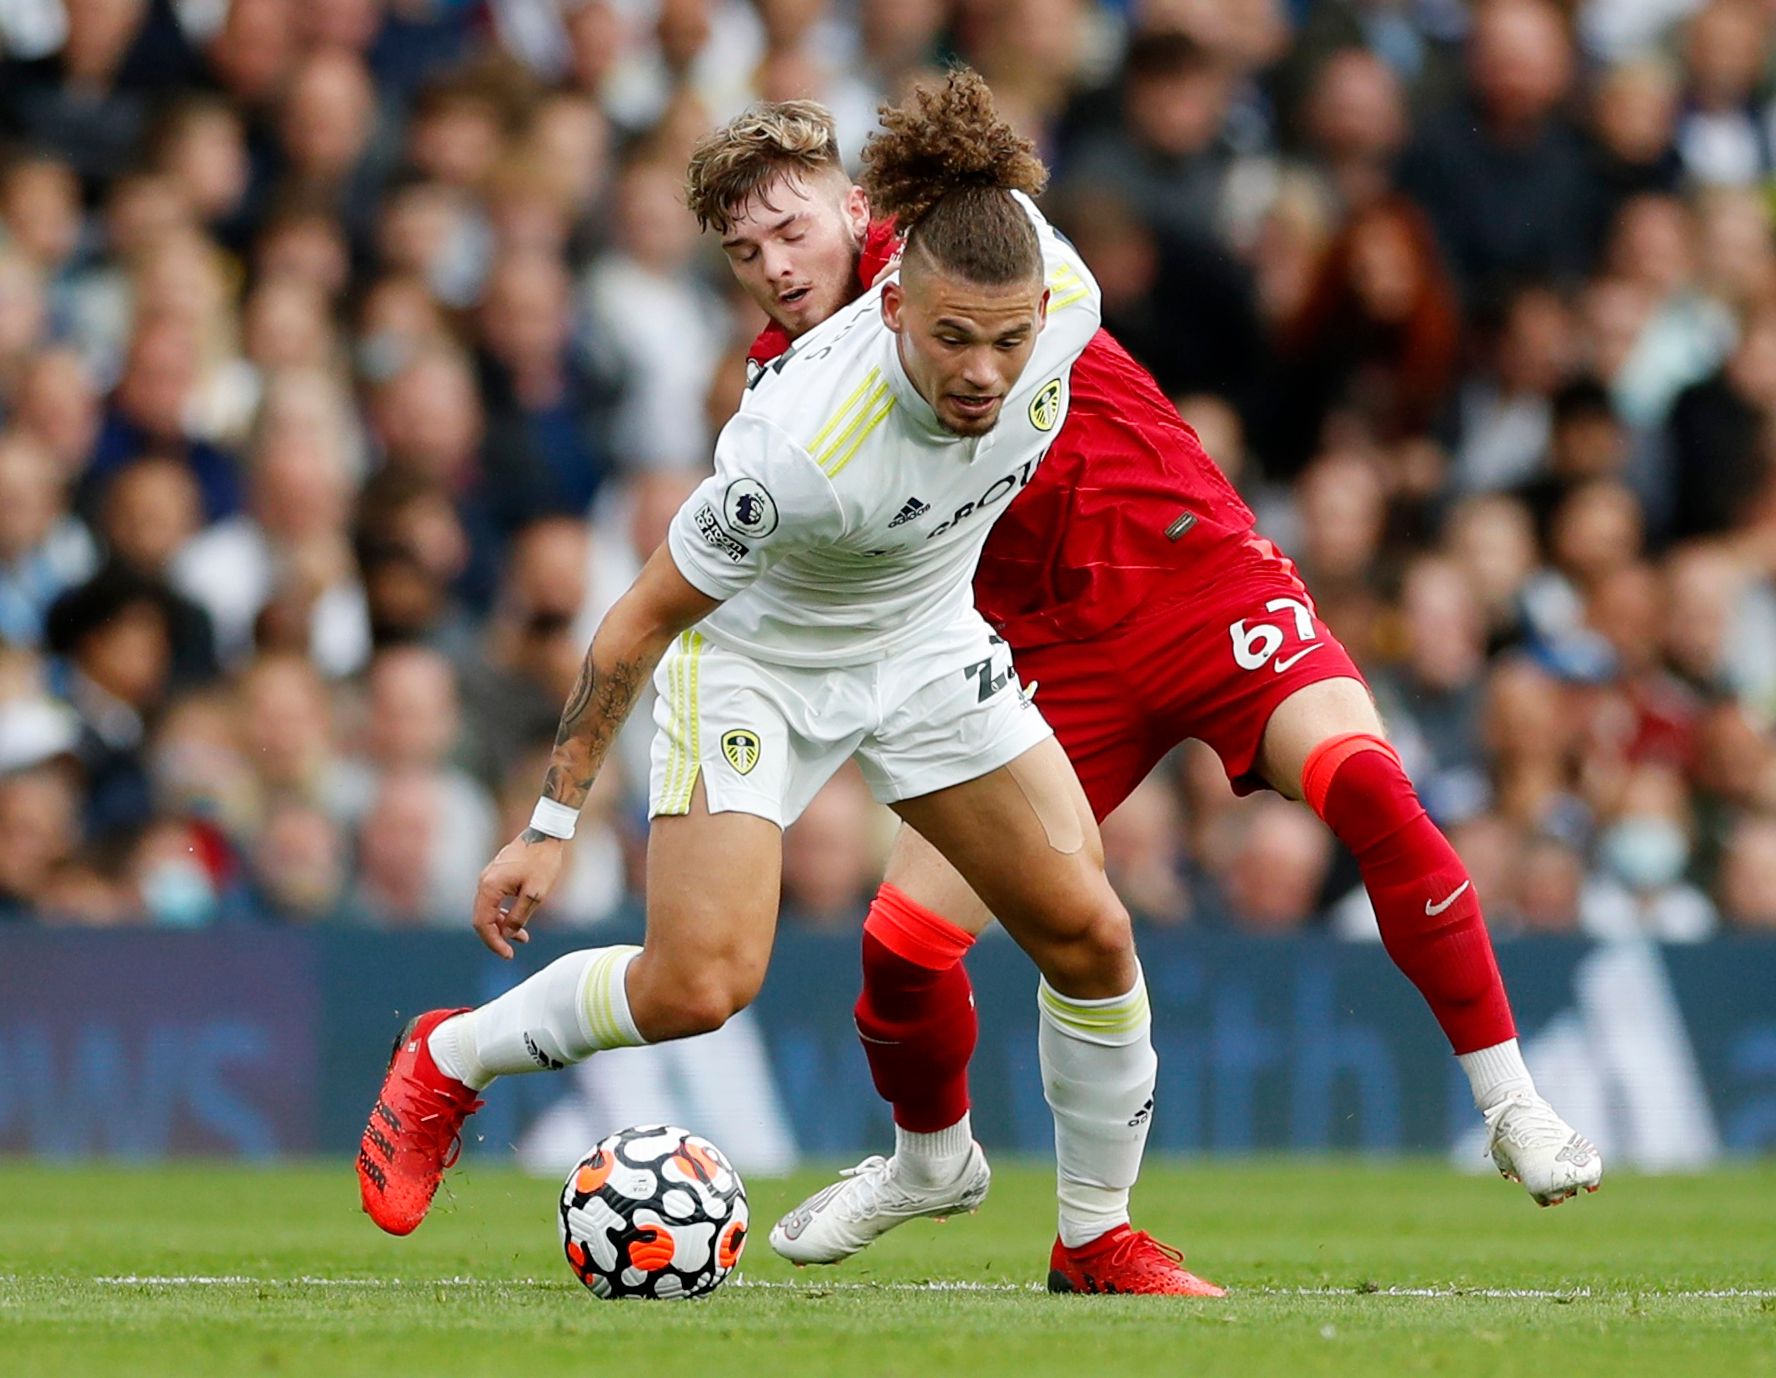 Soccer Football - Premier League - Leeds United v Liverpool - Elland Road, Leeds, Britain - September 12, 2021 Leeds United's Kalvin Phillips in action with Liverpool's Harvey Elliott Action Images via Reuters/Lee Smith EDITORIAL USE ONLY. No use with unauthorized audio, video, data, fixture lists, club/league logos or 'live' services. Online in-match use limited to 75 images, no video emulation. No use in betting, games or single club /league/player publications.  Please contact your account re